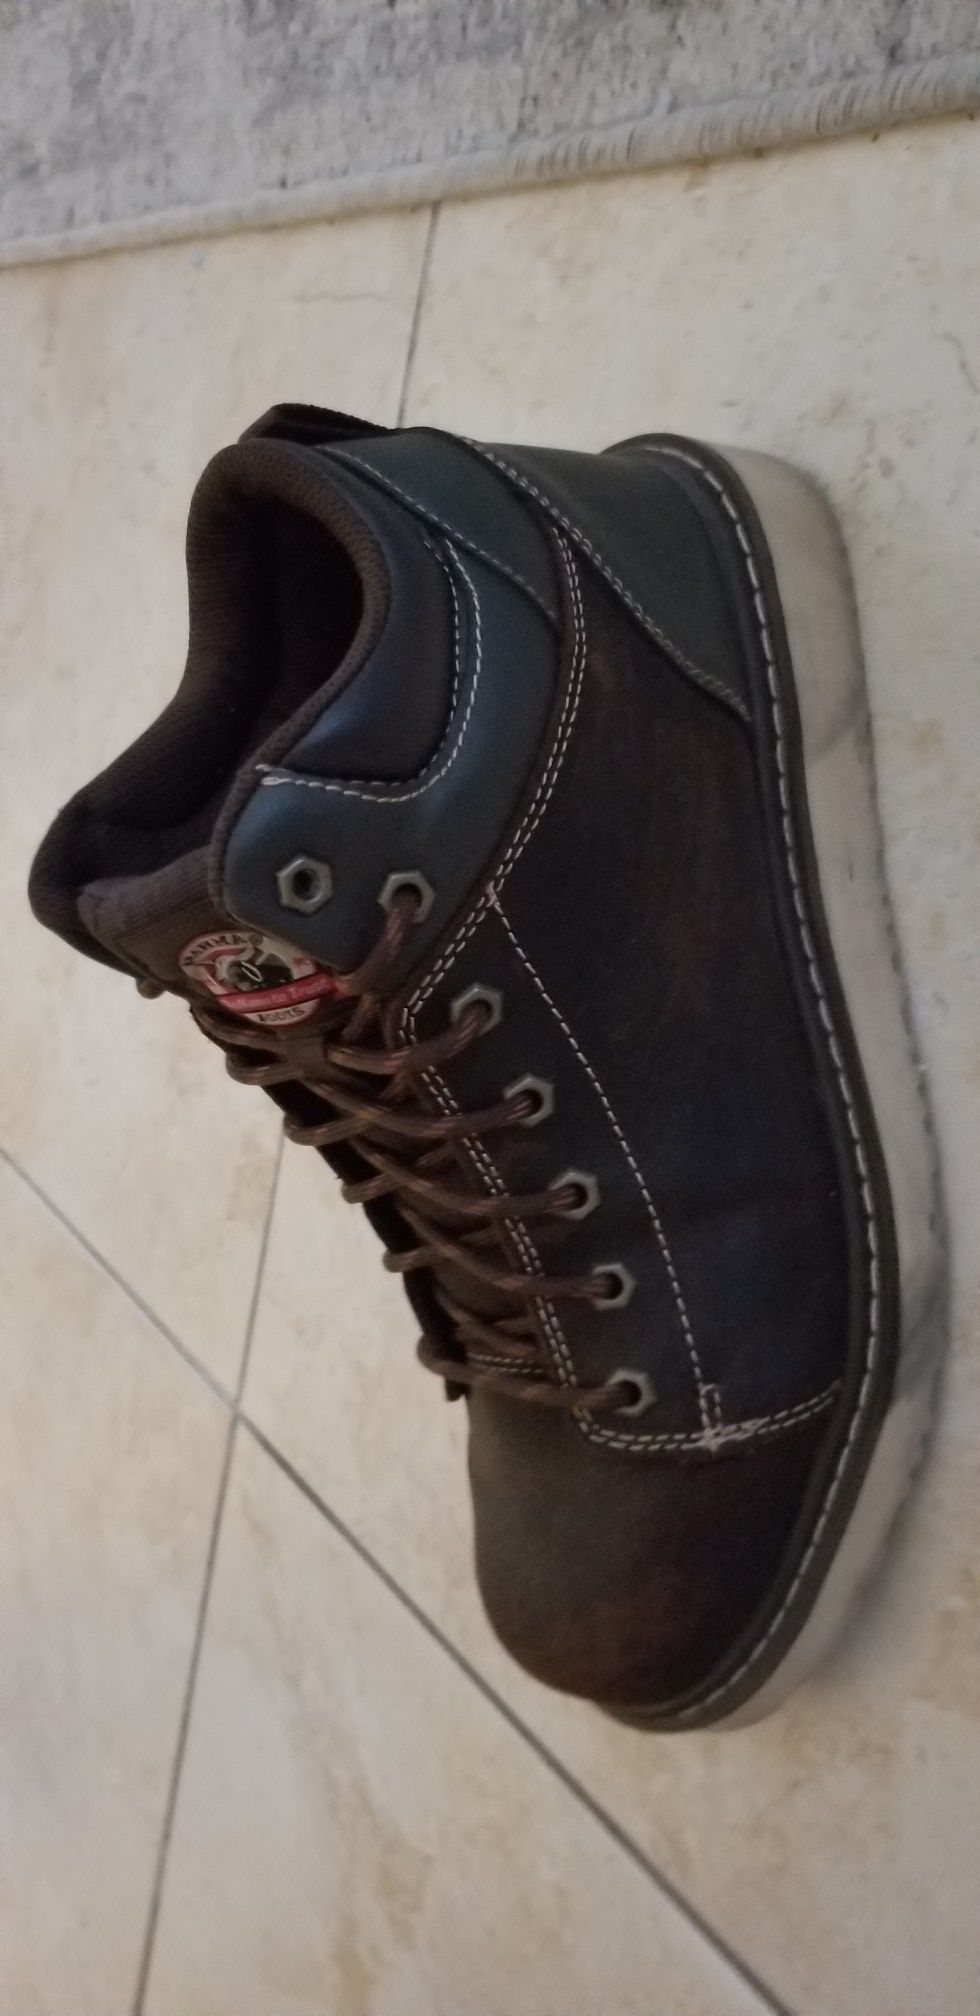 Brahma Boots Size 10 Work Boots Used ONCE